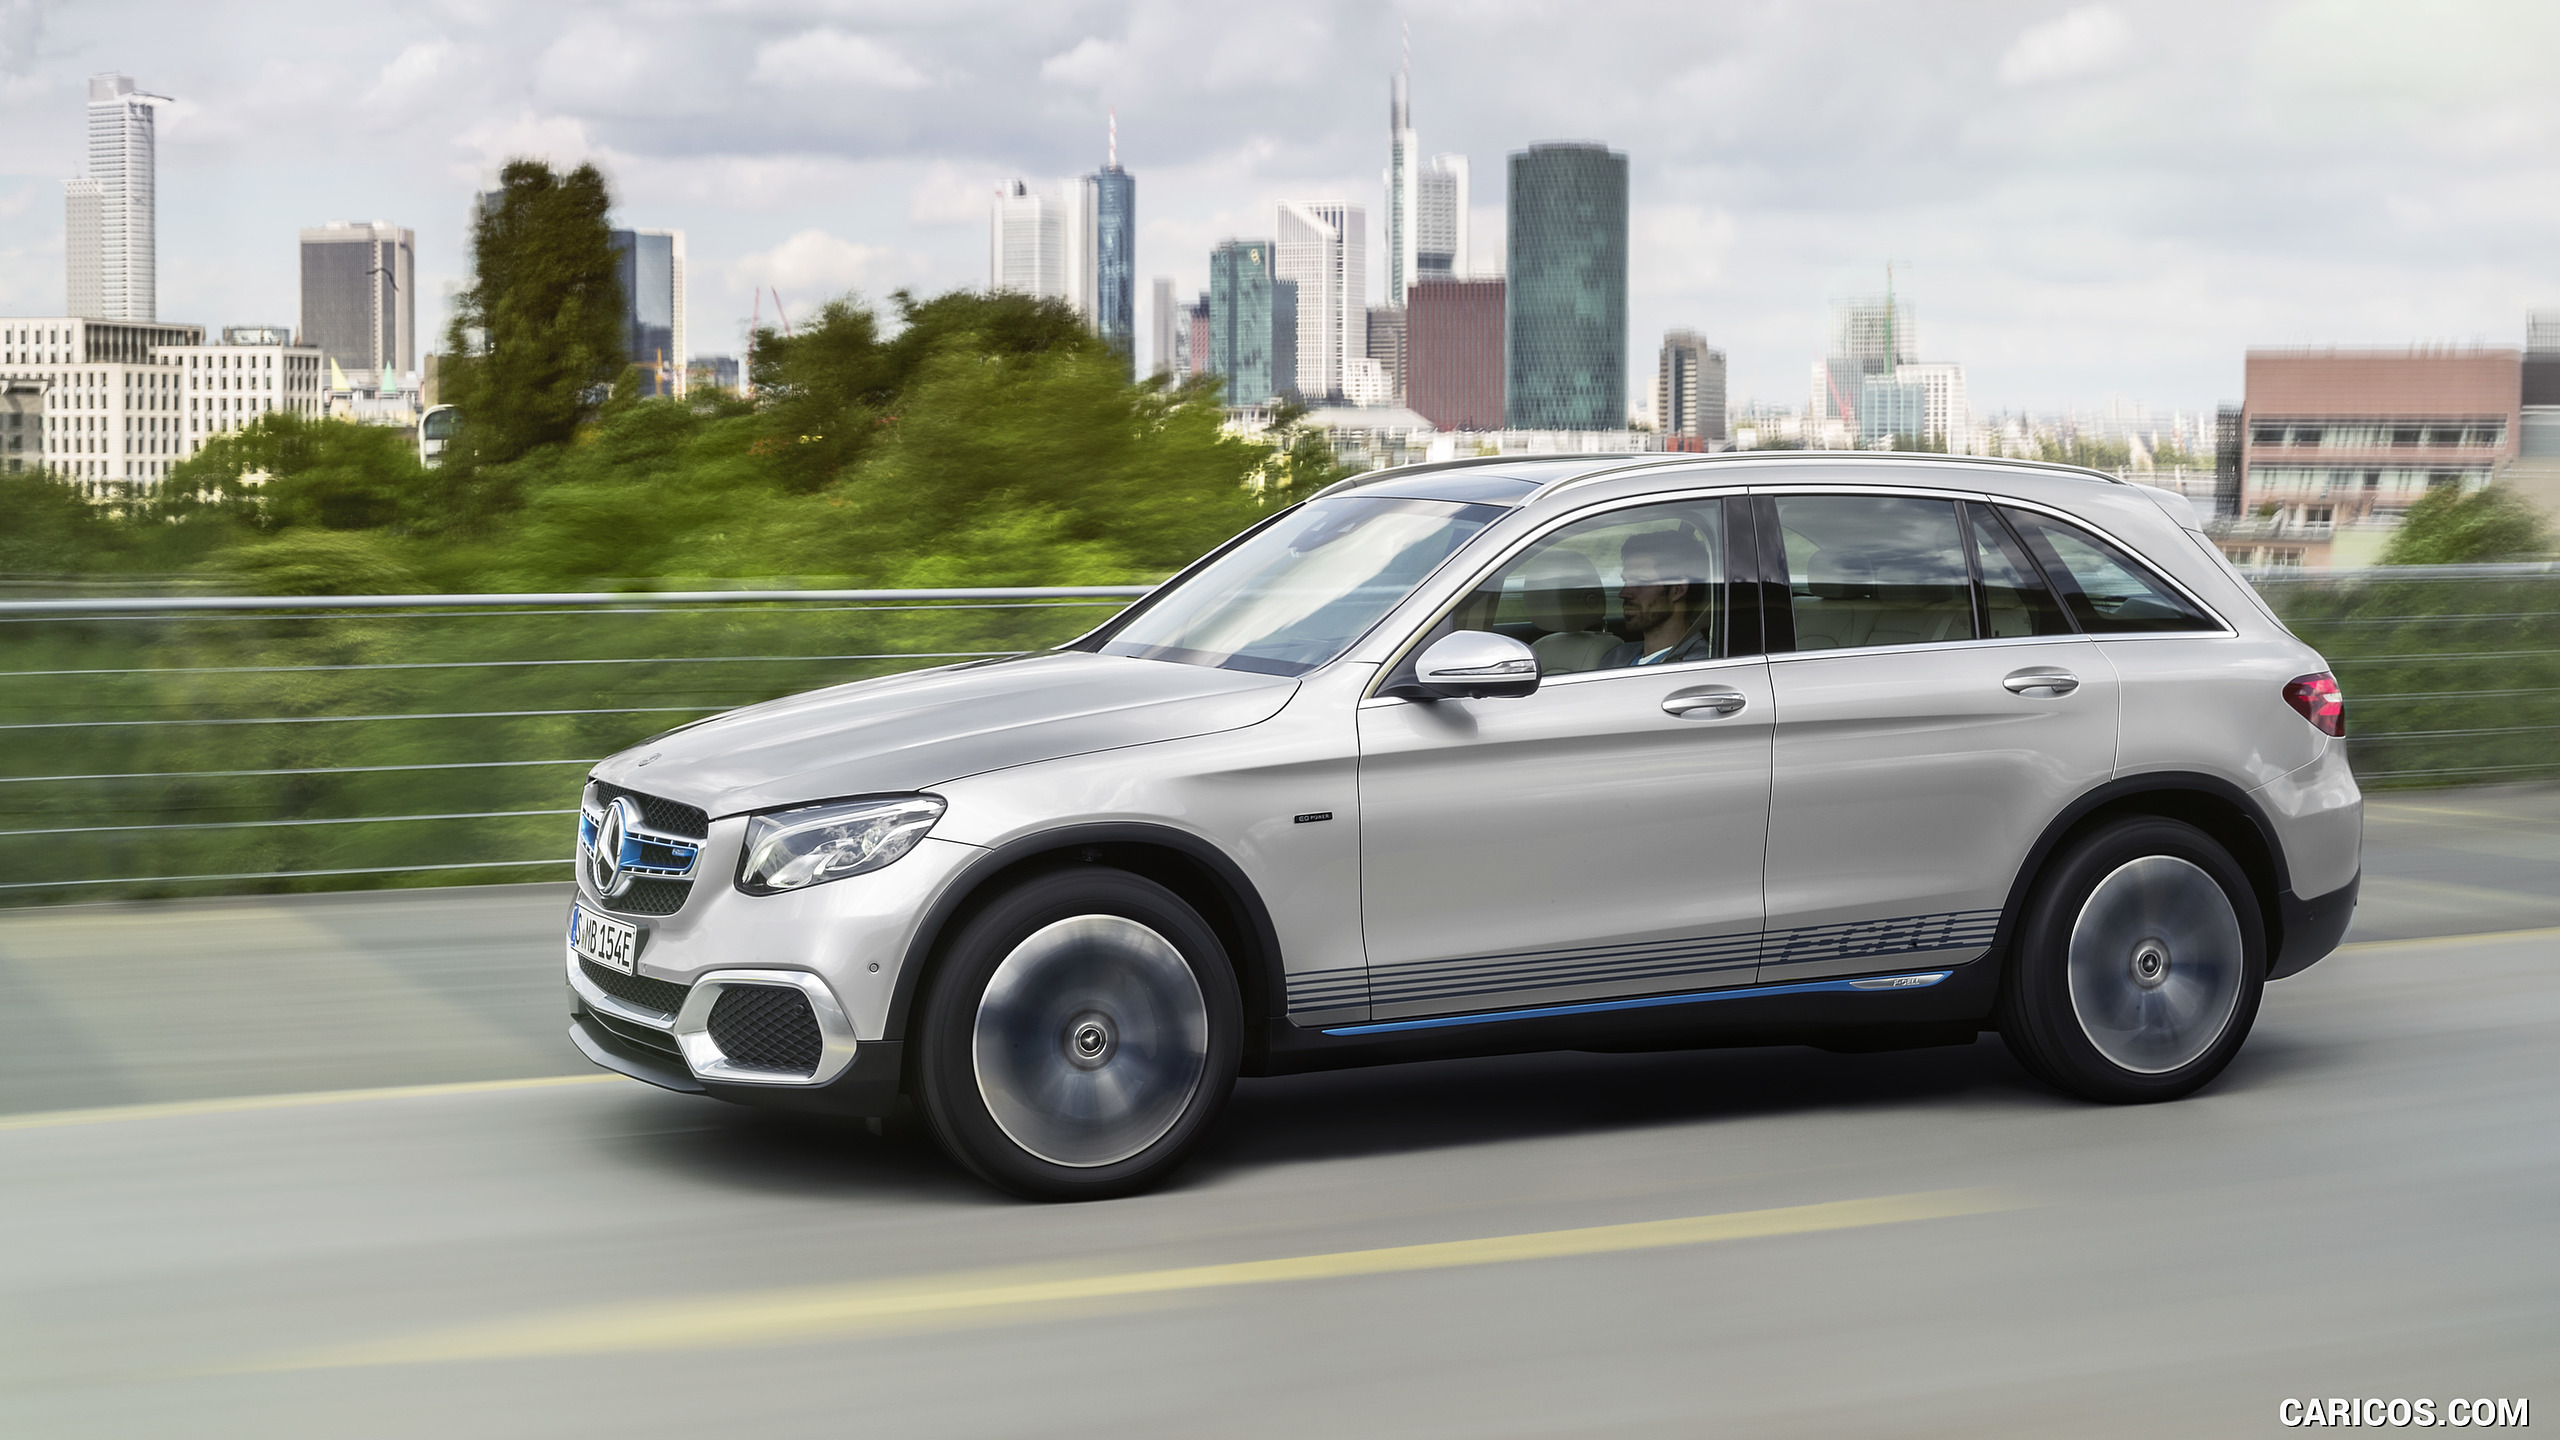 2017 Mercedes-Benz GLC F-CELL Concept - Side, #8 of 25